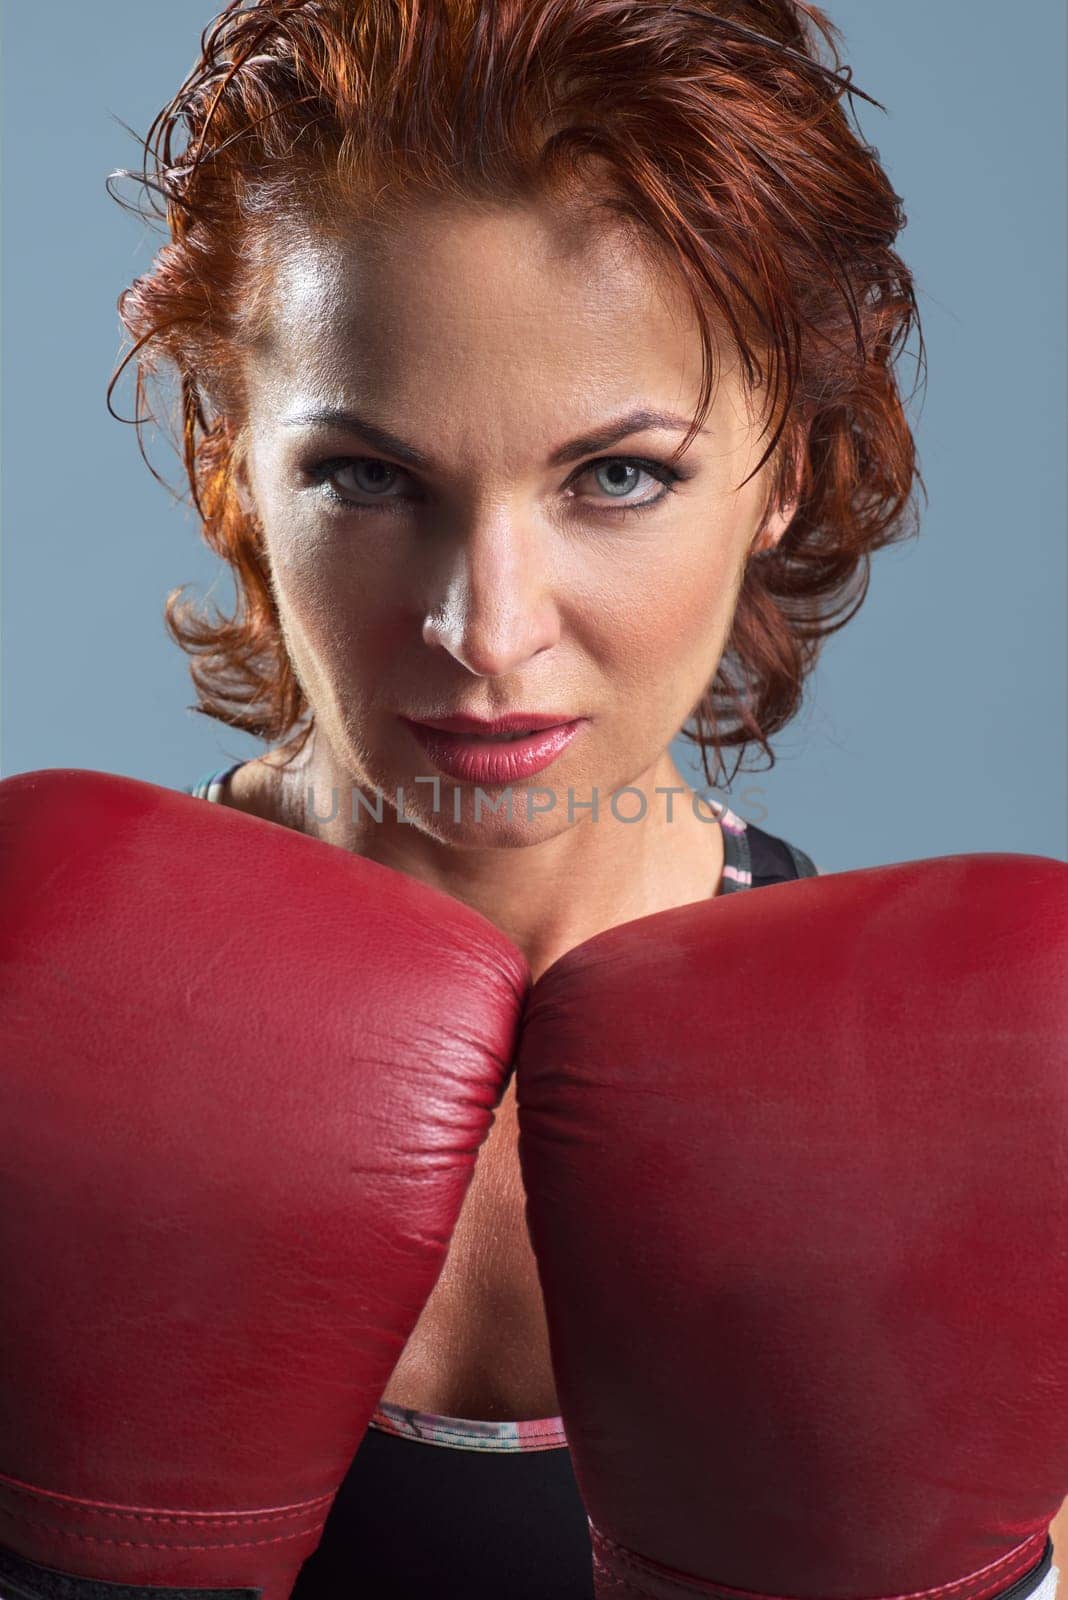 Studio portrait of sporty mature woman in boxing gloves on gray background by VH-studio